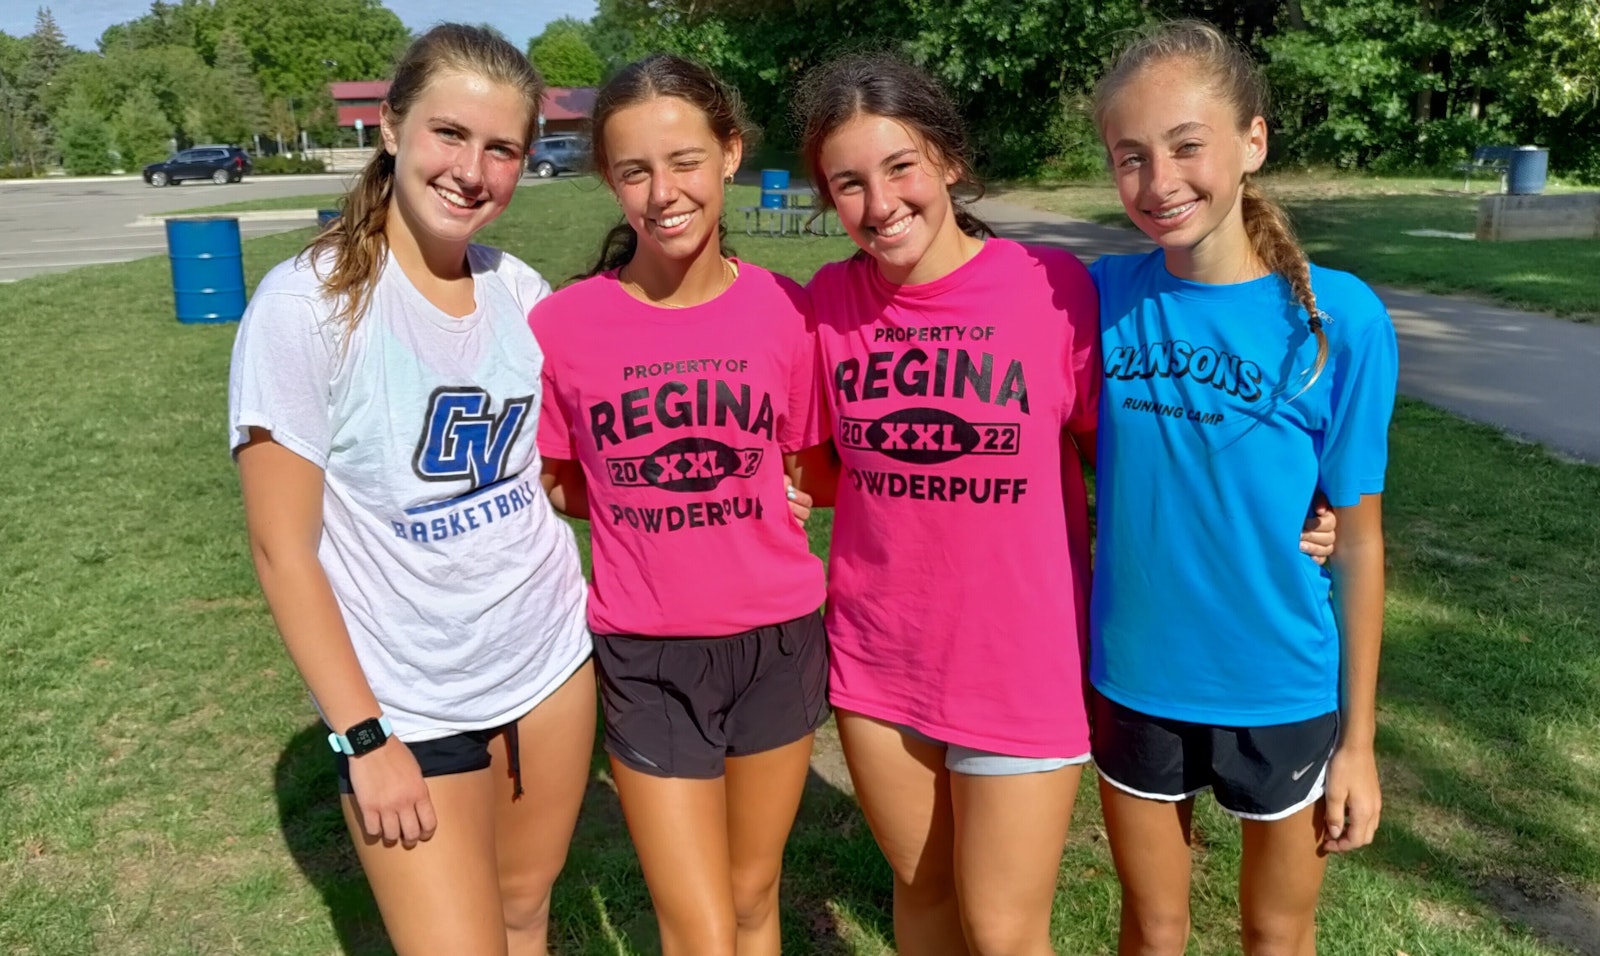 This quartet will be counted on to provide the leadership for the Regina cross country squad: Junior Kennedy Roskopp (left), junior Gabby Fernandez, sophomore Natale  Lentine and sophomore Elizabeth  Ambroggio. About Coach Golden, Lentine said, “He’s the best coach we can ask for. He knows how to push us to be the best we can be.”